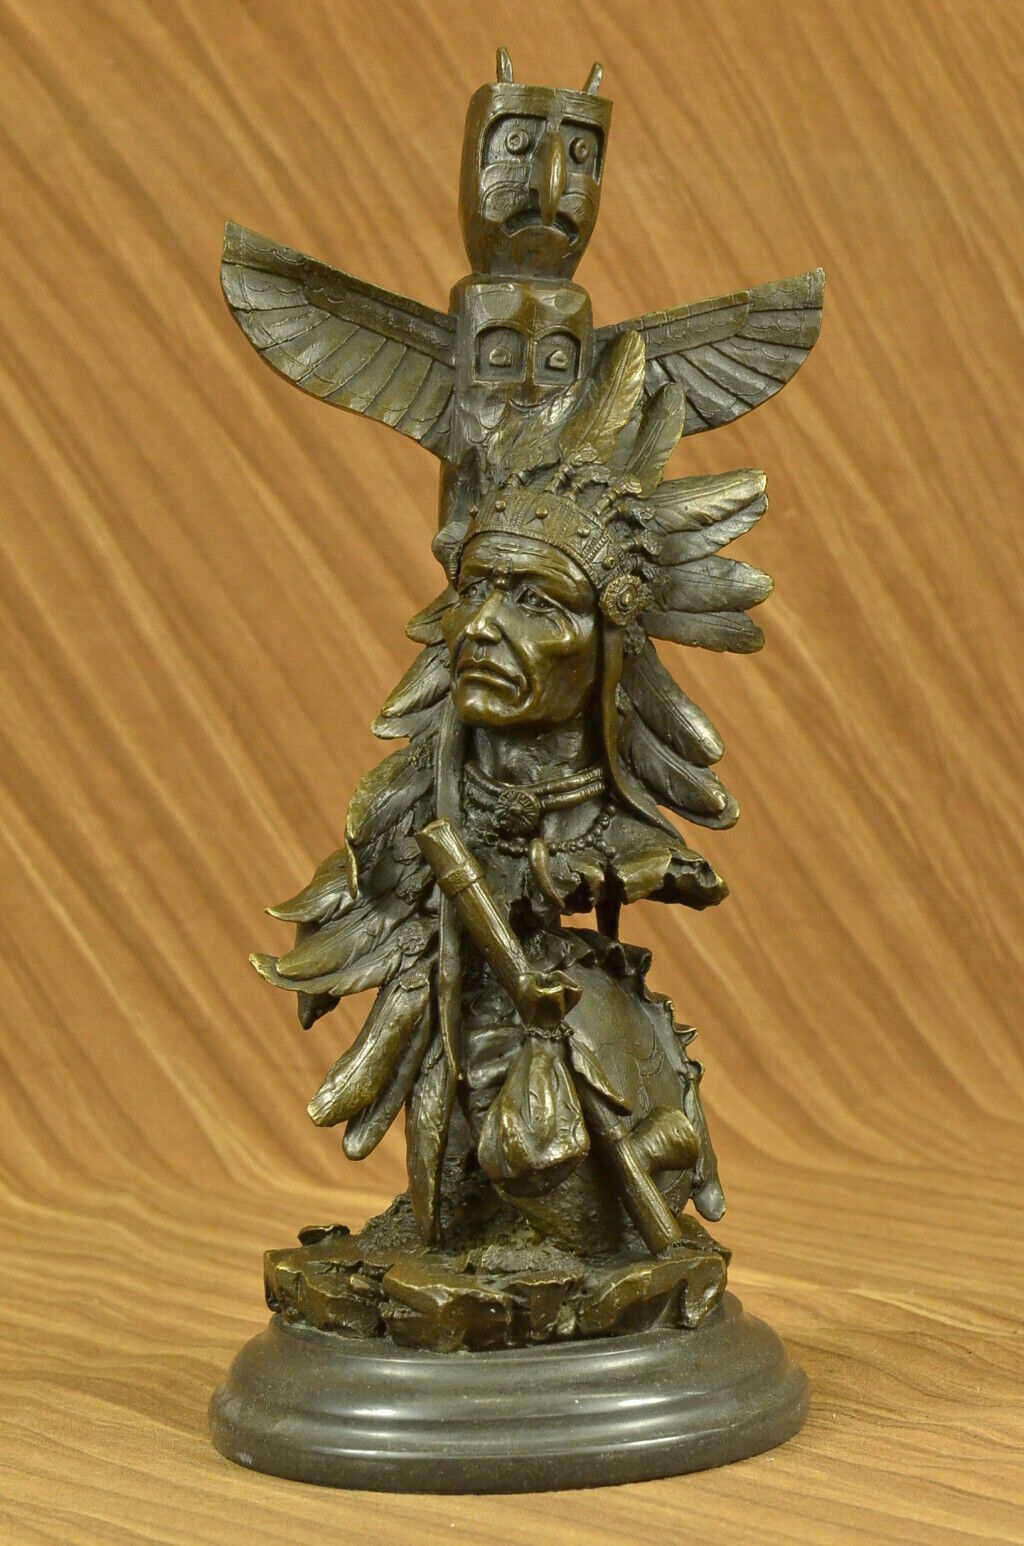 NATIVE AMERICAN INDIAN CHIEF GERONIMO BUST SPEAR BRONZE FIGURINE ART DEAL DECO